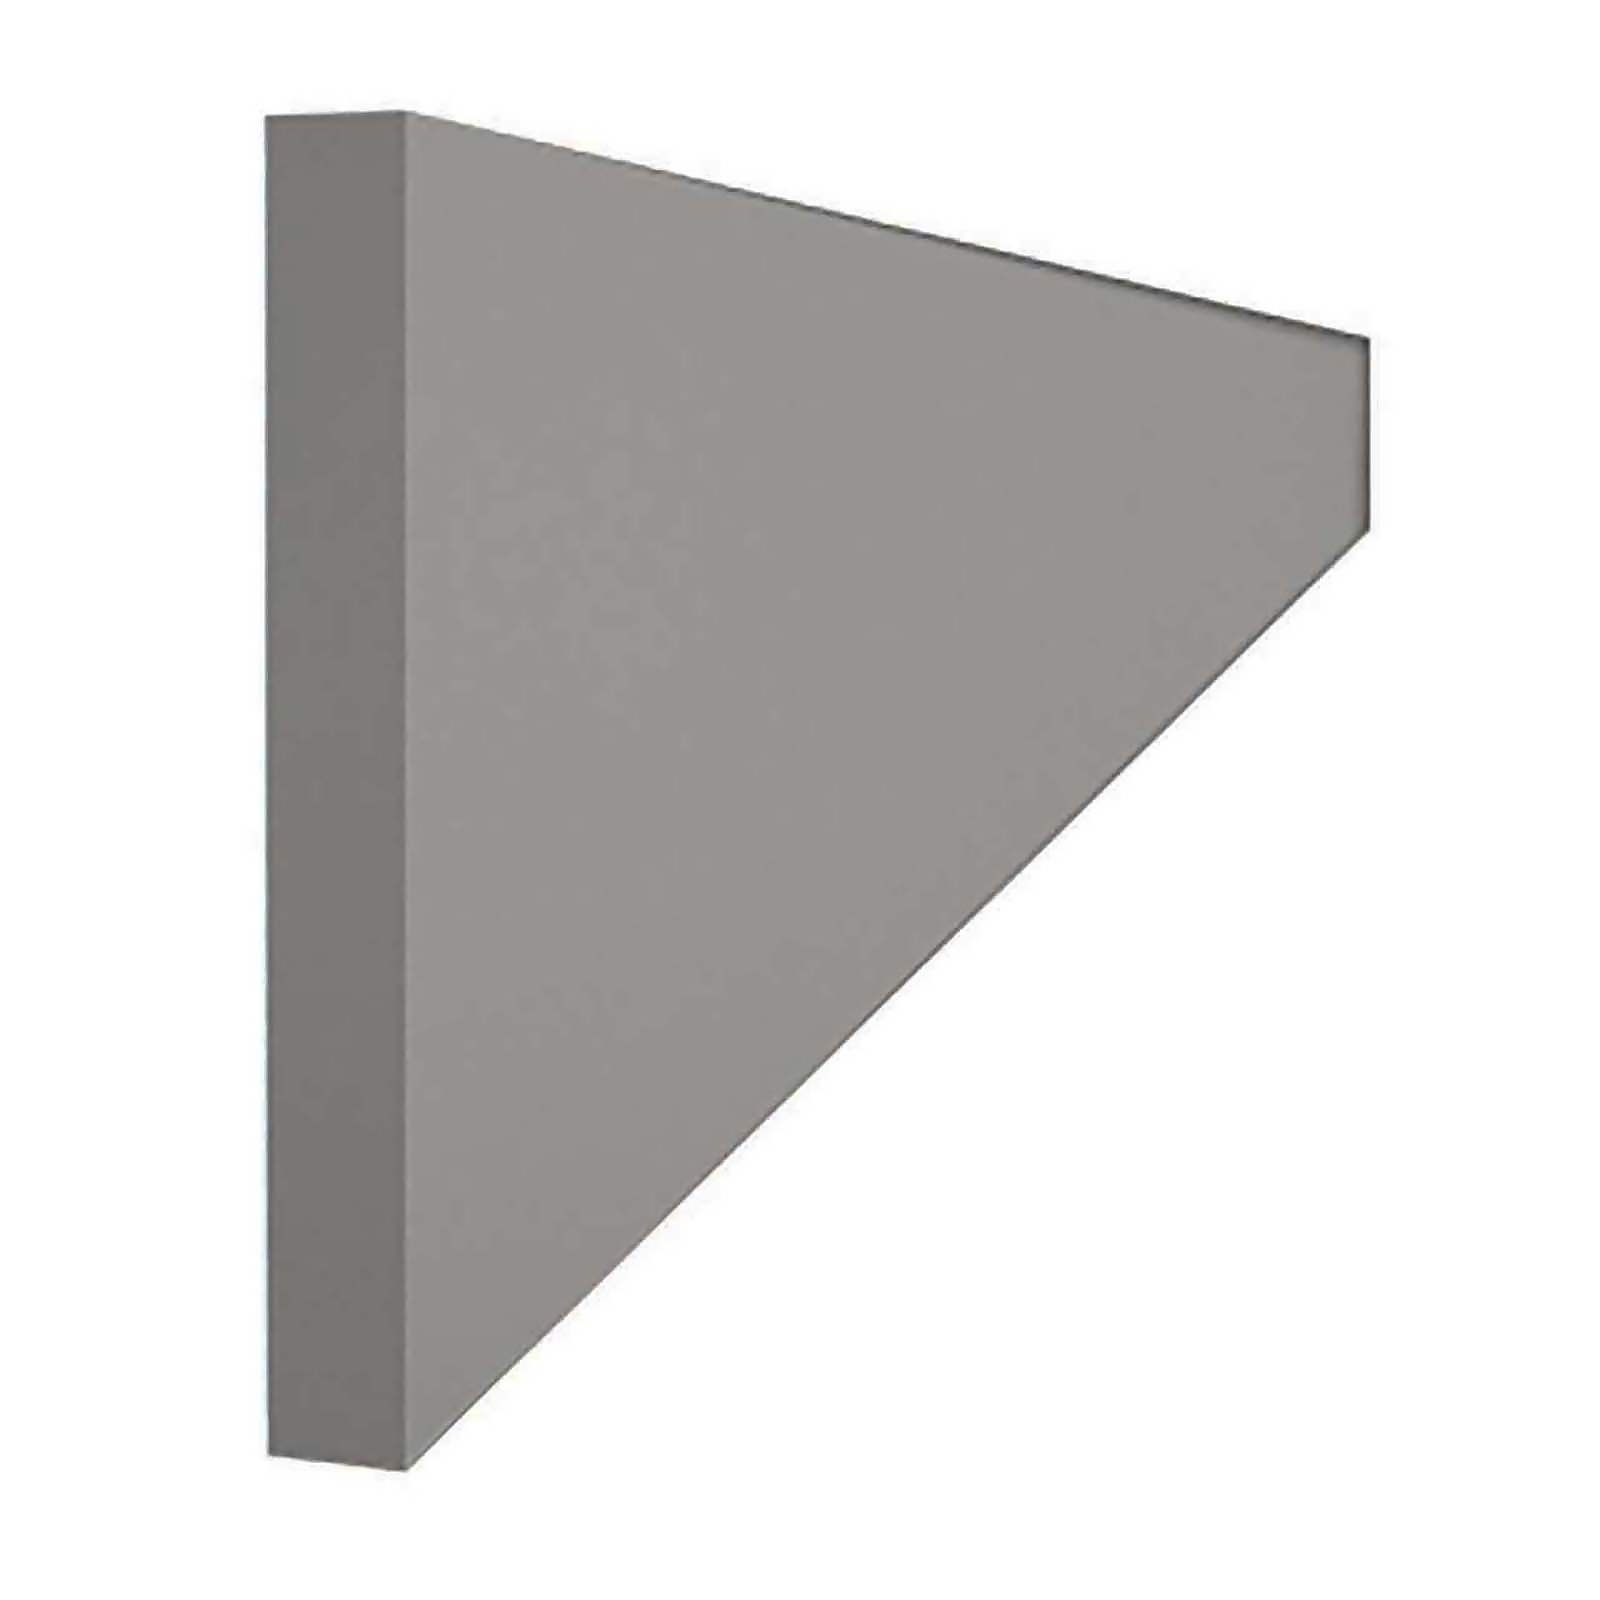 Photo of 2400mm Continuous Plinth For High Gloss Slab Grey Or Handleless Grey Gloss